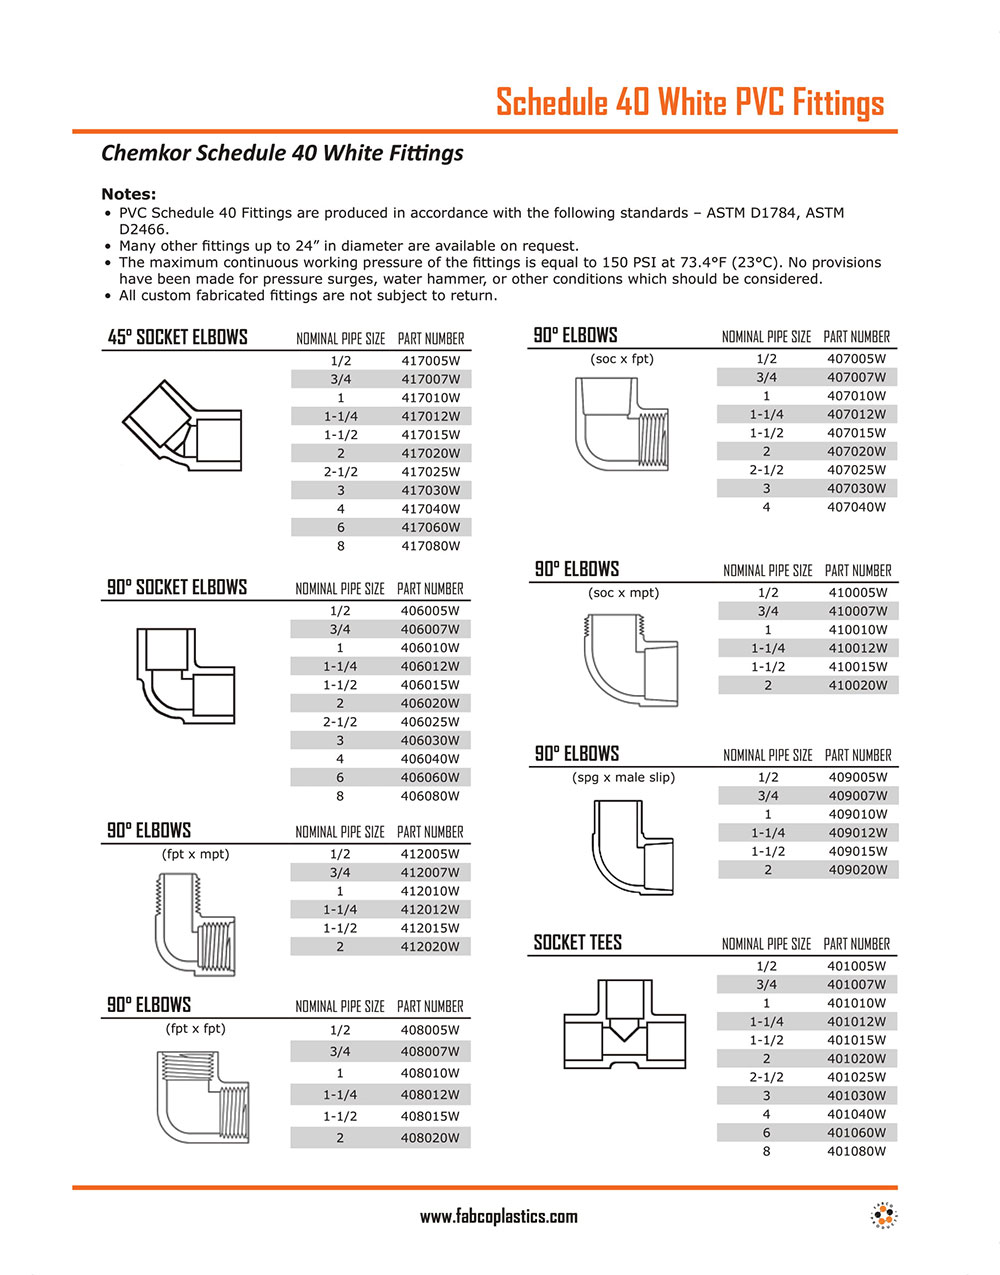 Schedule 40 White PVC Fittings